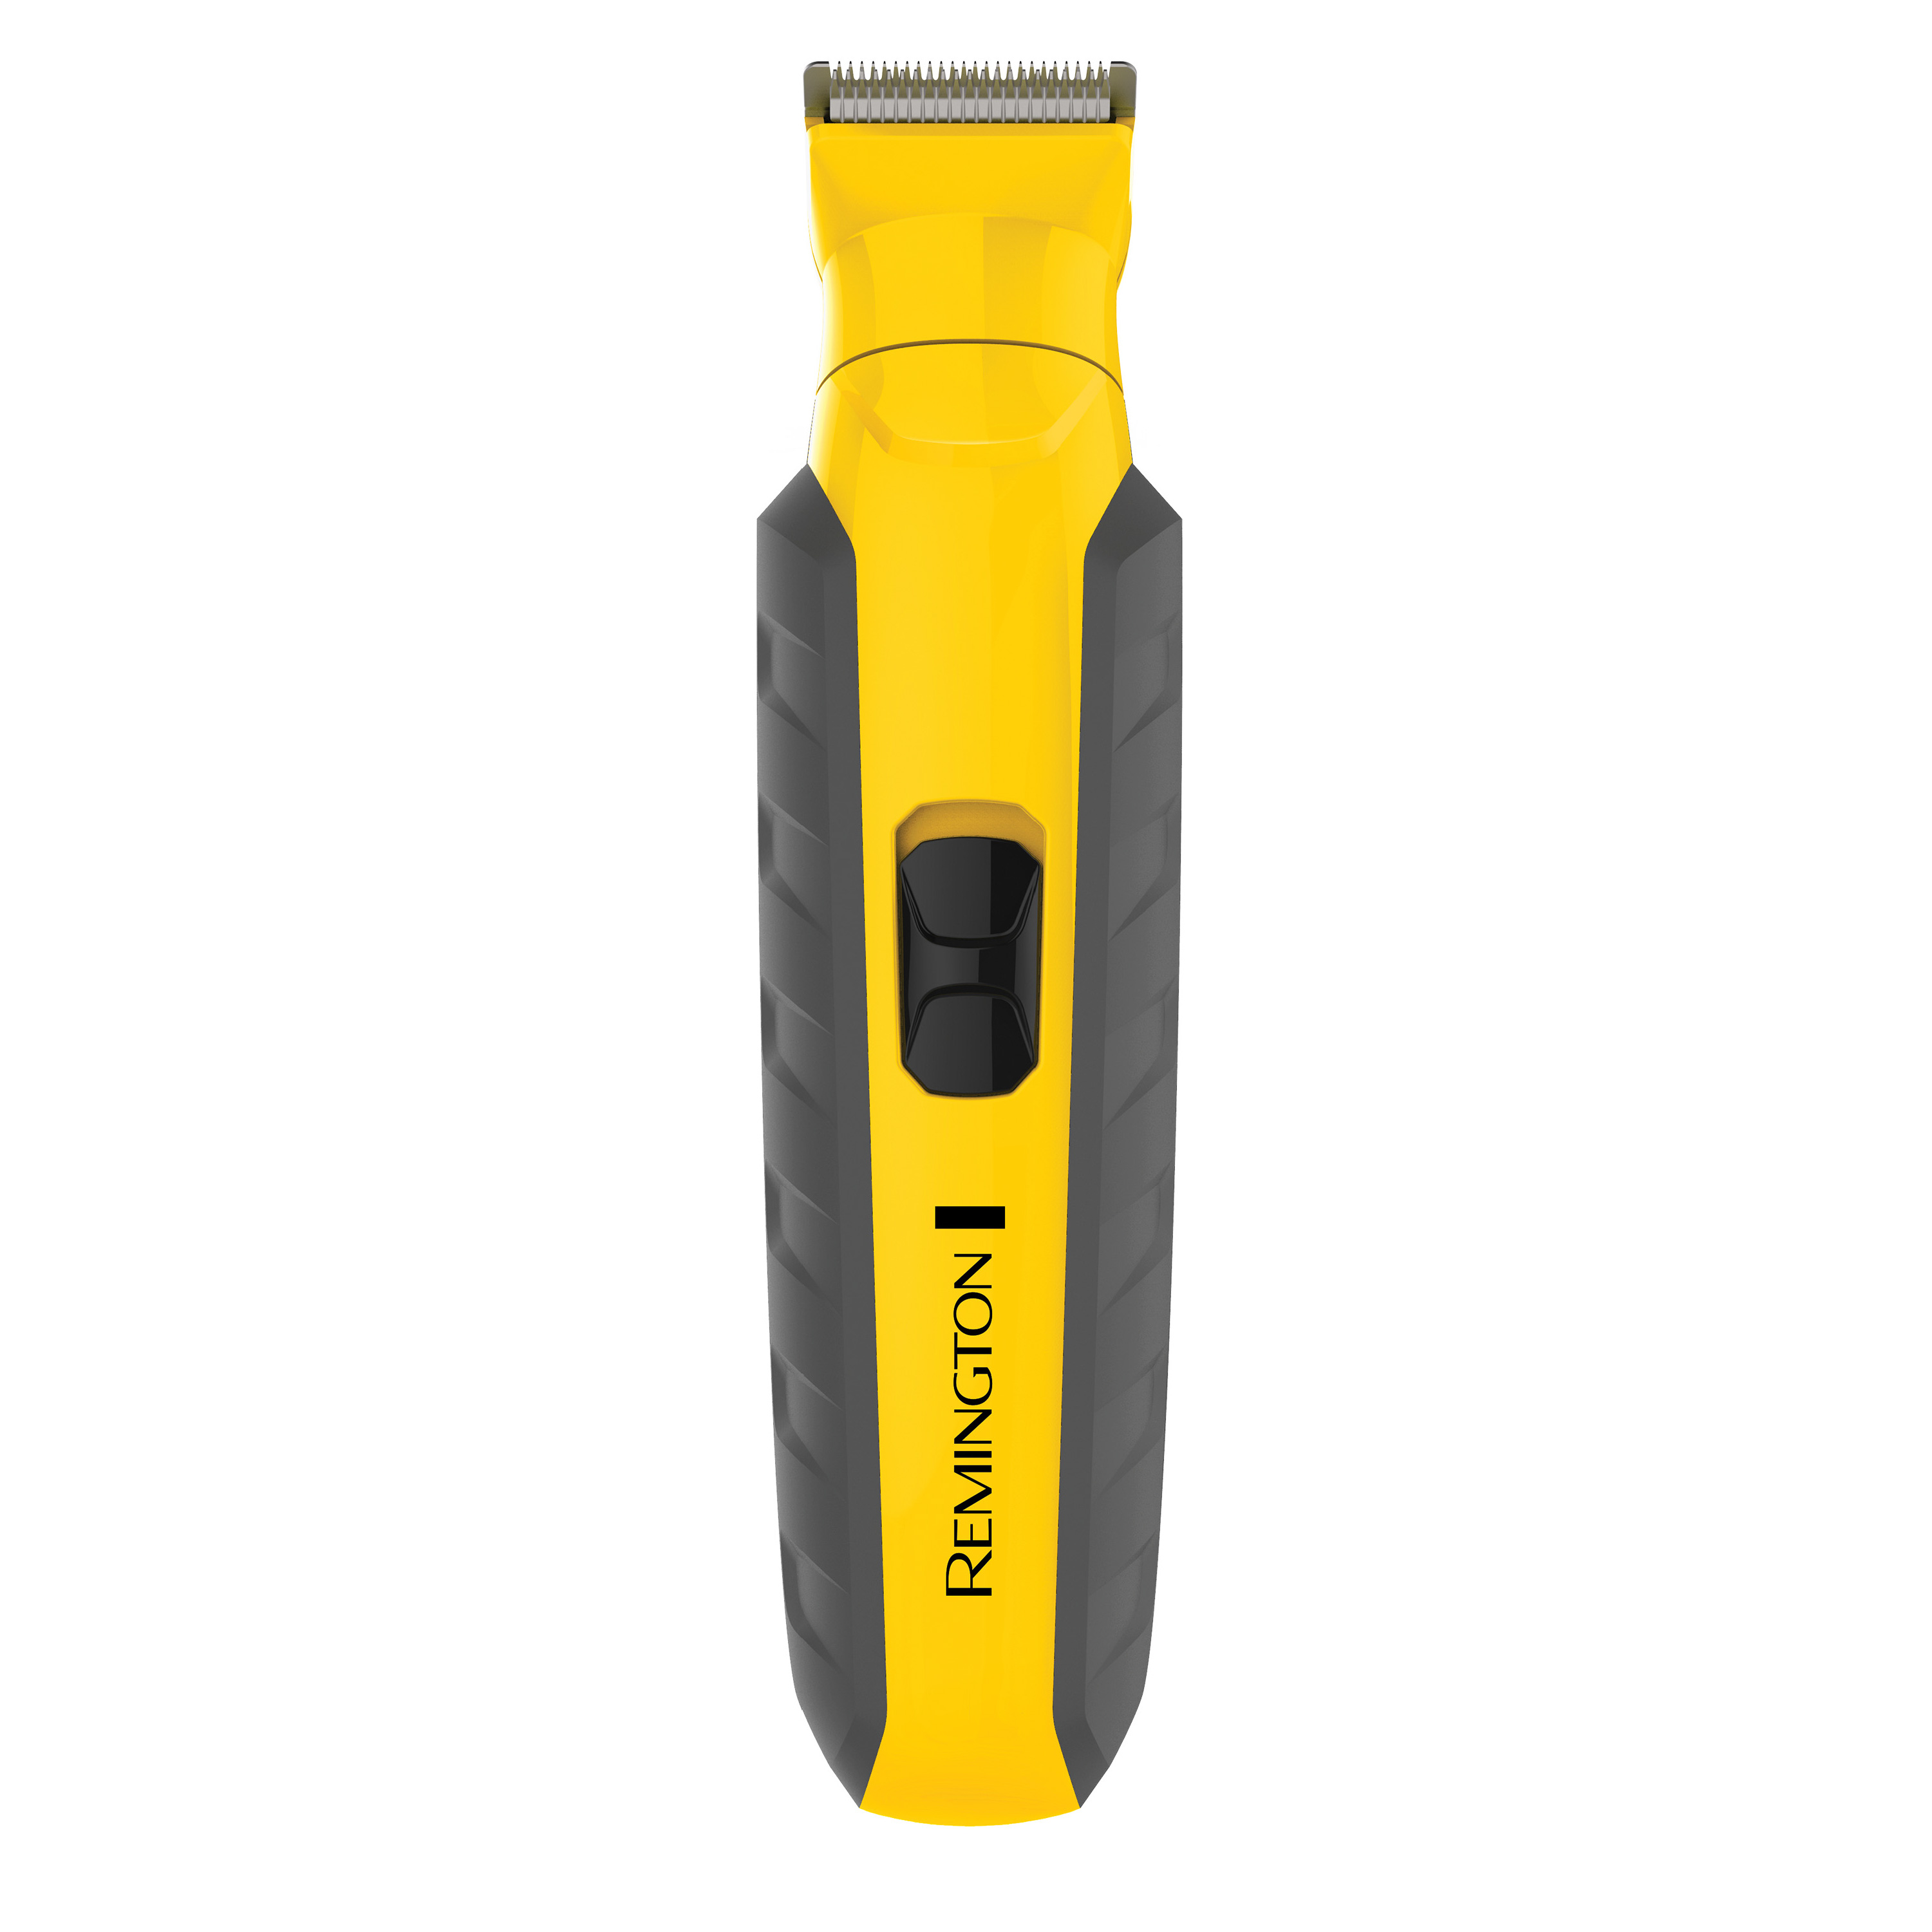 Remington Virtually Indestructible All-in-One Grooming Kit, Yellow/Black, PG6855A - image 9 of 9